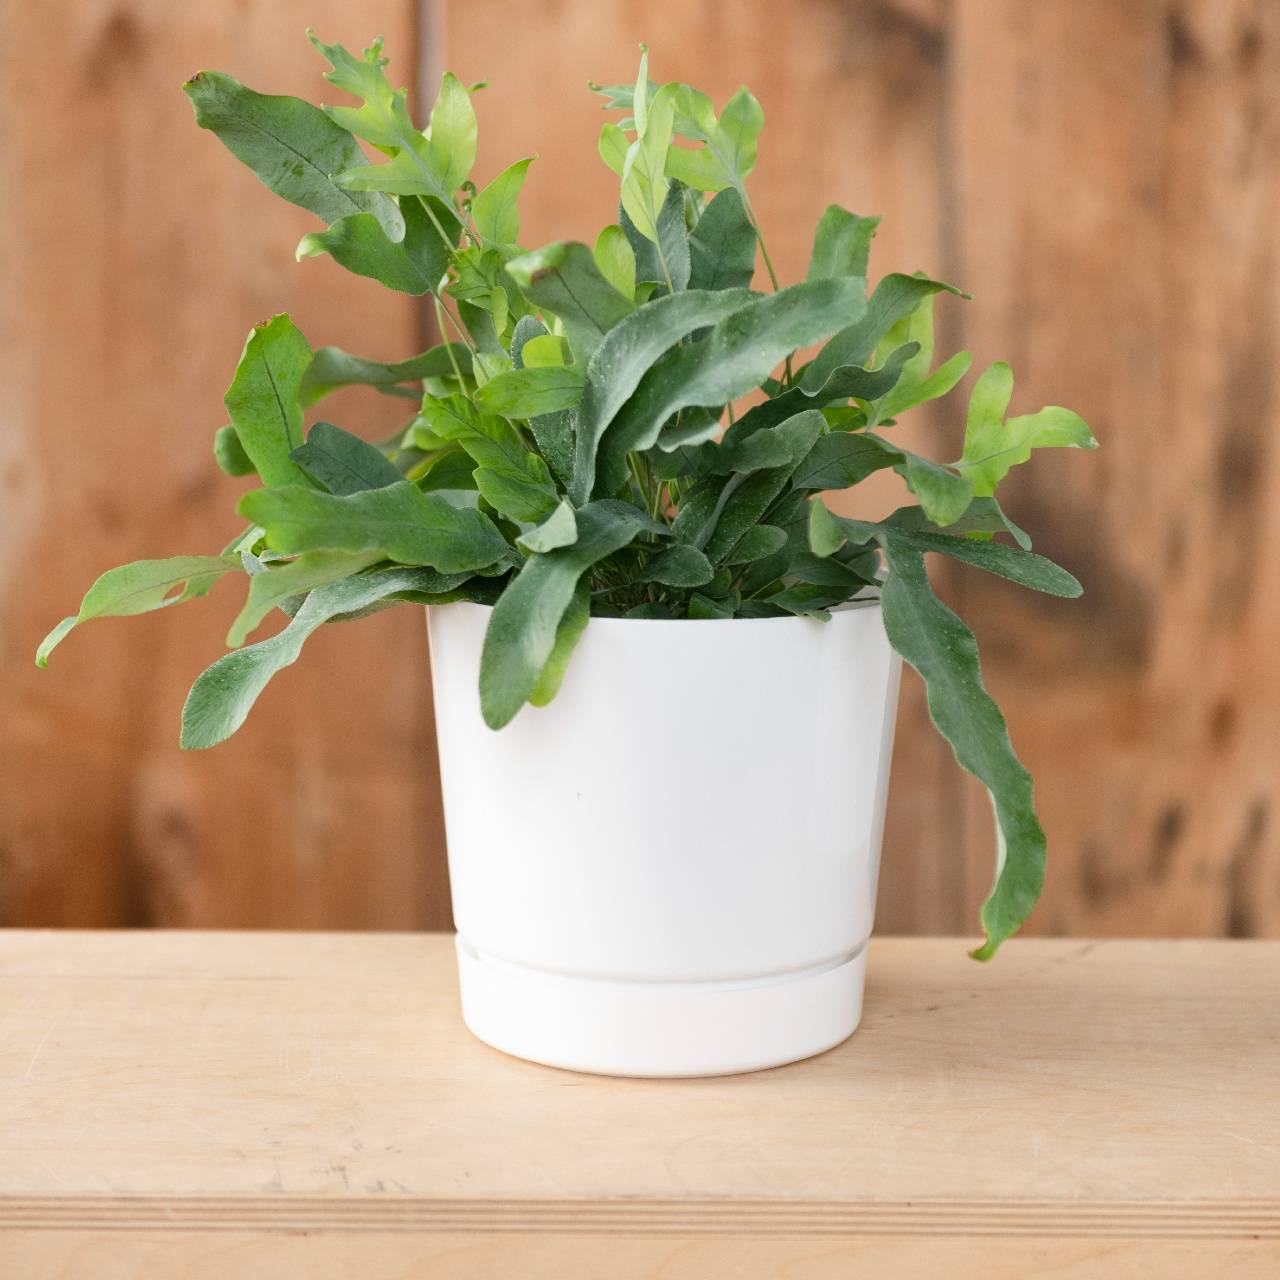 Green plant in a white cylinder pot on a wood table